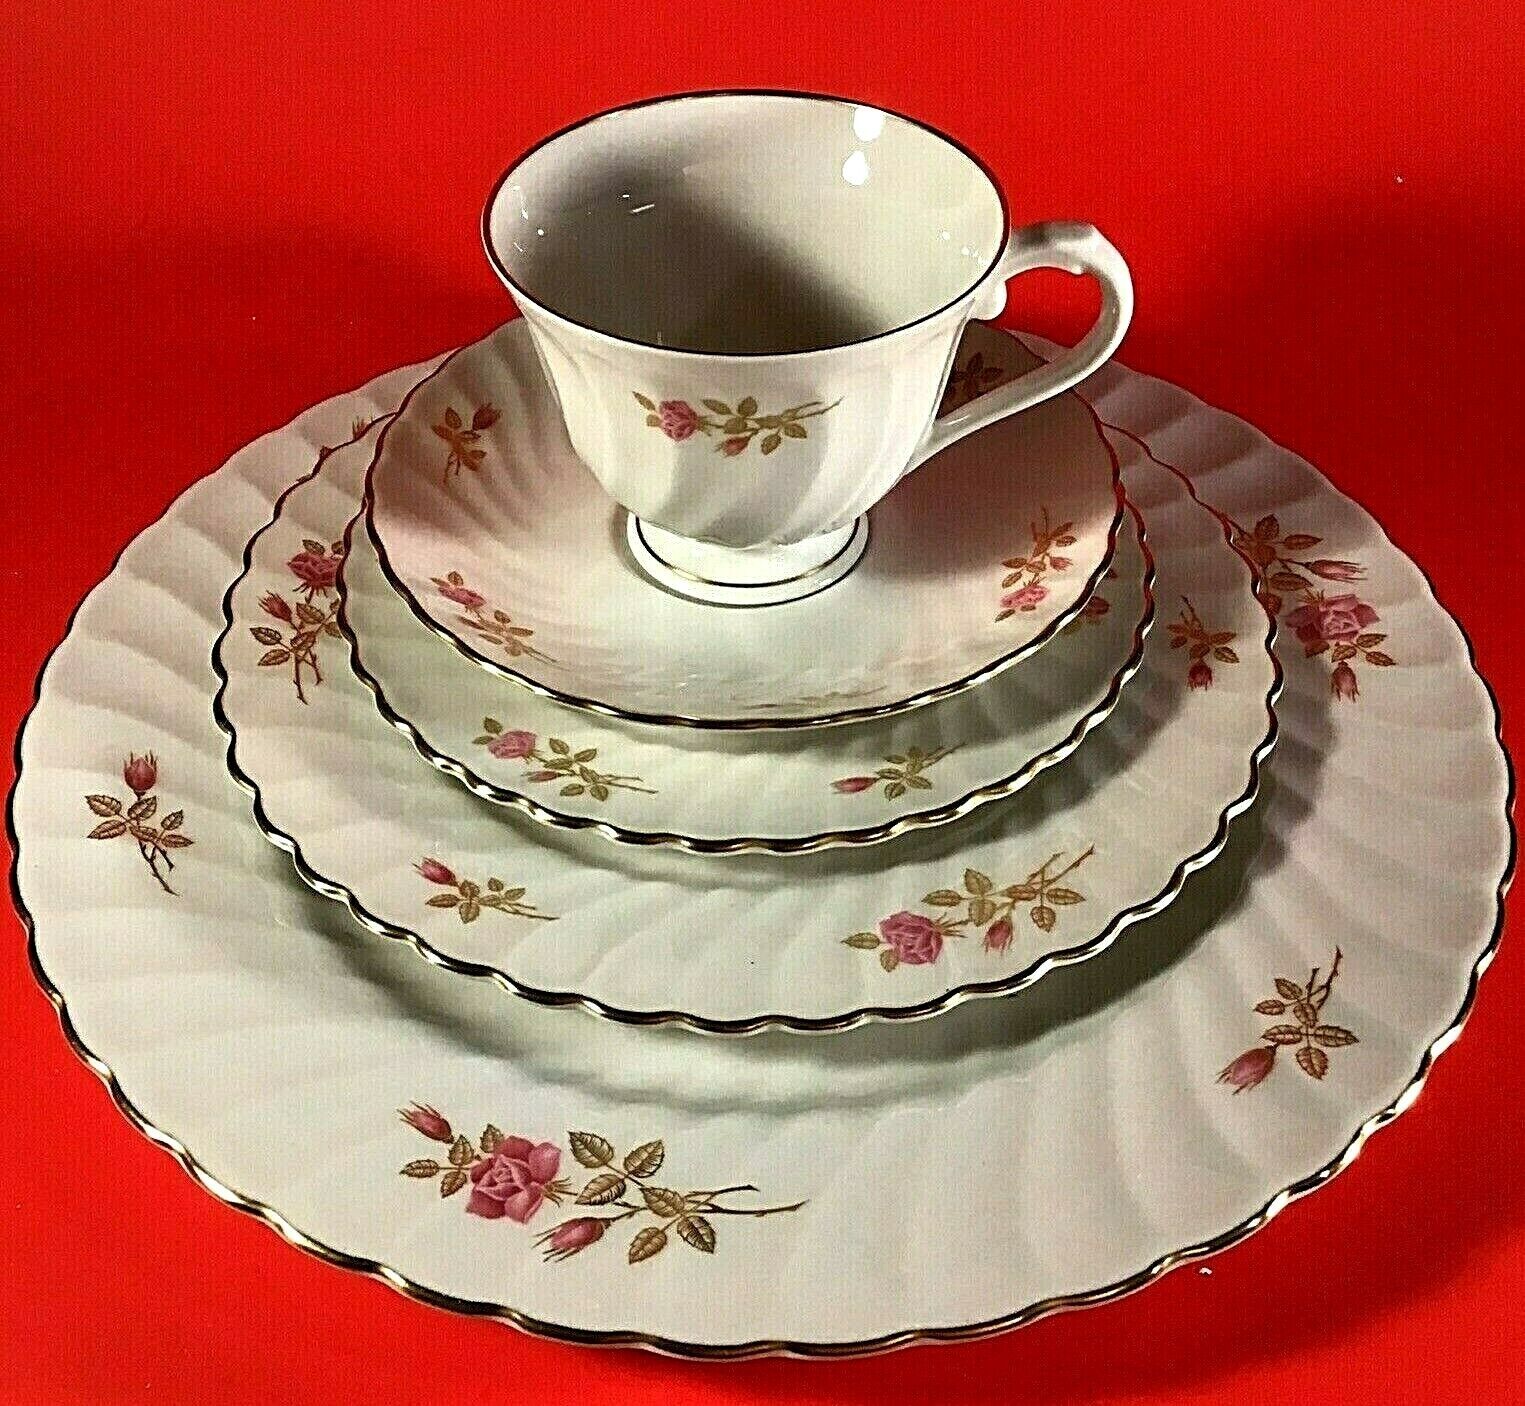 SYRACUSE CHINA COURTSHIP SILHOUETTE 5 PIECE PLACE SETTING PINK AND GOLD FLORAL syracuse china